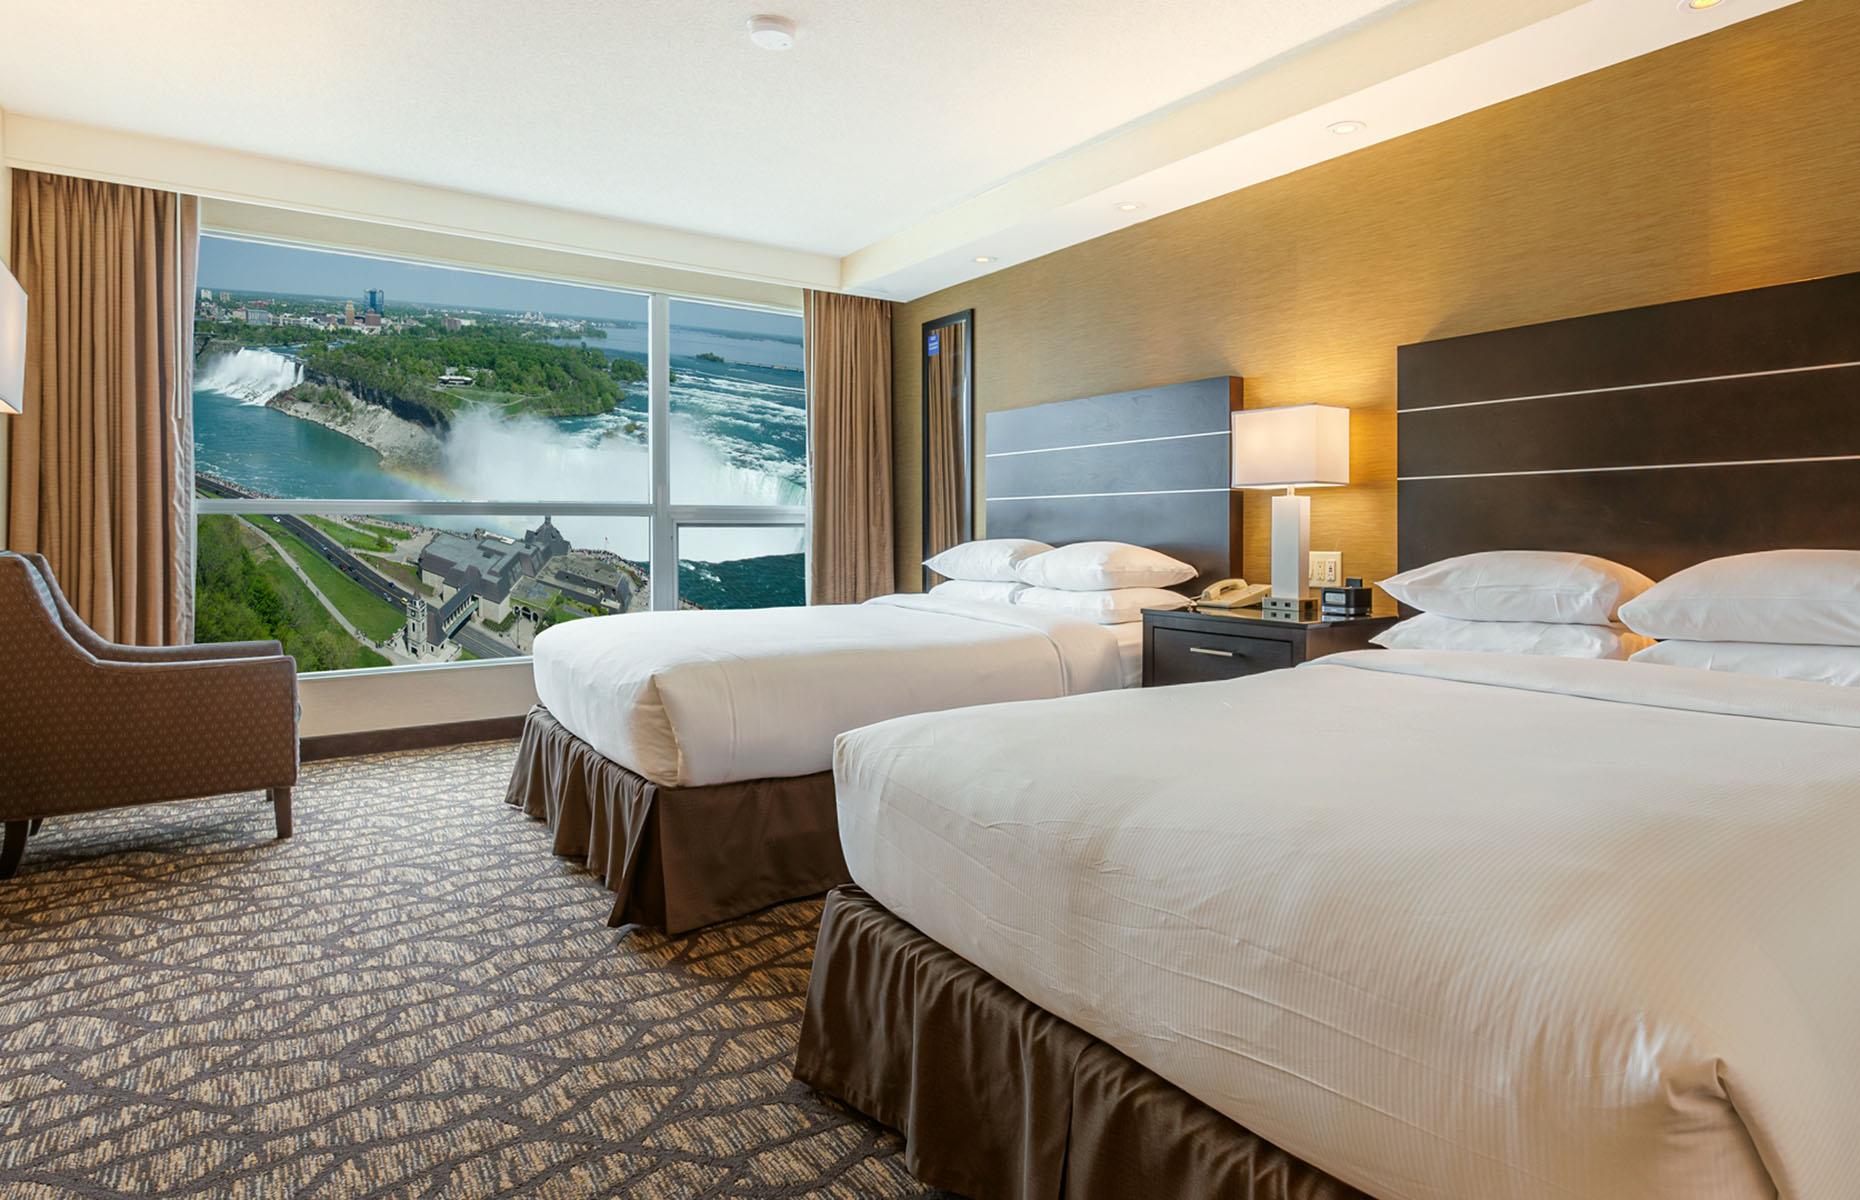 <p>For arguably the best views, stay at the 42-floor <a href="https://embassysuitesniagara.com/closest-hotel-to-niagara-falls.php?gad_source=1&gclid=CjwKCAiAu9yqBhBmEiwAHTx5pylShjgNTXqCwooLEMaR7jAvWbB6PmWr6u37O8eGWU3NIBKqE0qU6hoCzTgQAvD_BwE">Embassy Suites by Hilton</a>, located just 100 yards from the natural wonder. The high floor, two-room suites are super spacious, with two double beds, a living room area complete with sofa bed and flatscreen TV, bath and shower room, desk, fridge, coffee machine, microwave, wet bar, and the most incredible view you’ve probably ever experienced from a hotel room.</p>  <p>Breakfast is served with a view at the Keg Steakhouse and Bar, located on the ninth floor. Enjoy your eggs while you watch the sunrise over the falls. It’s spectacular.</p>